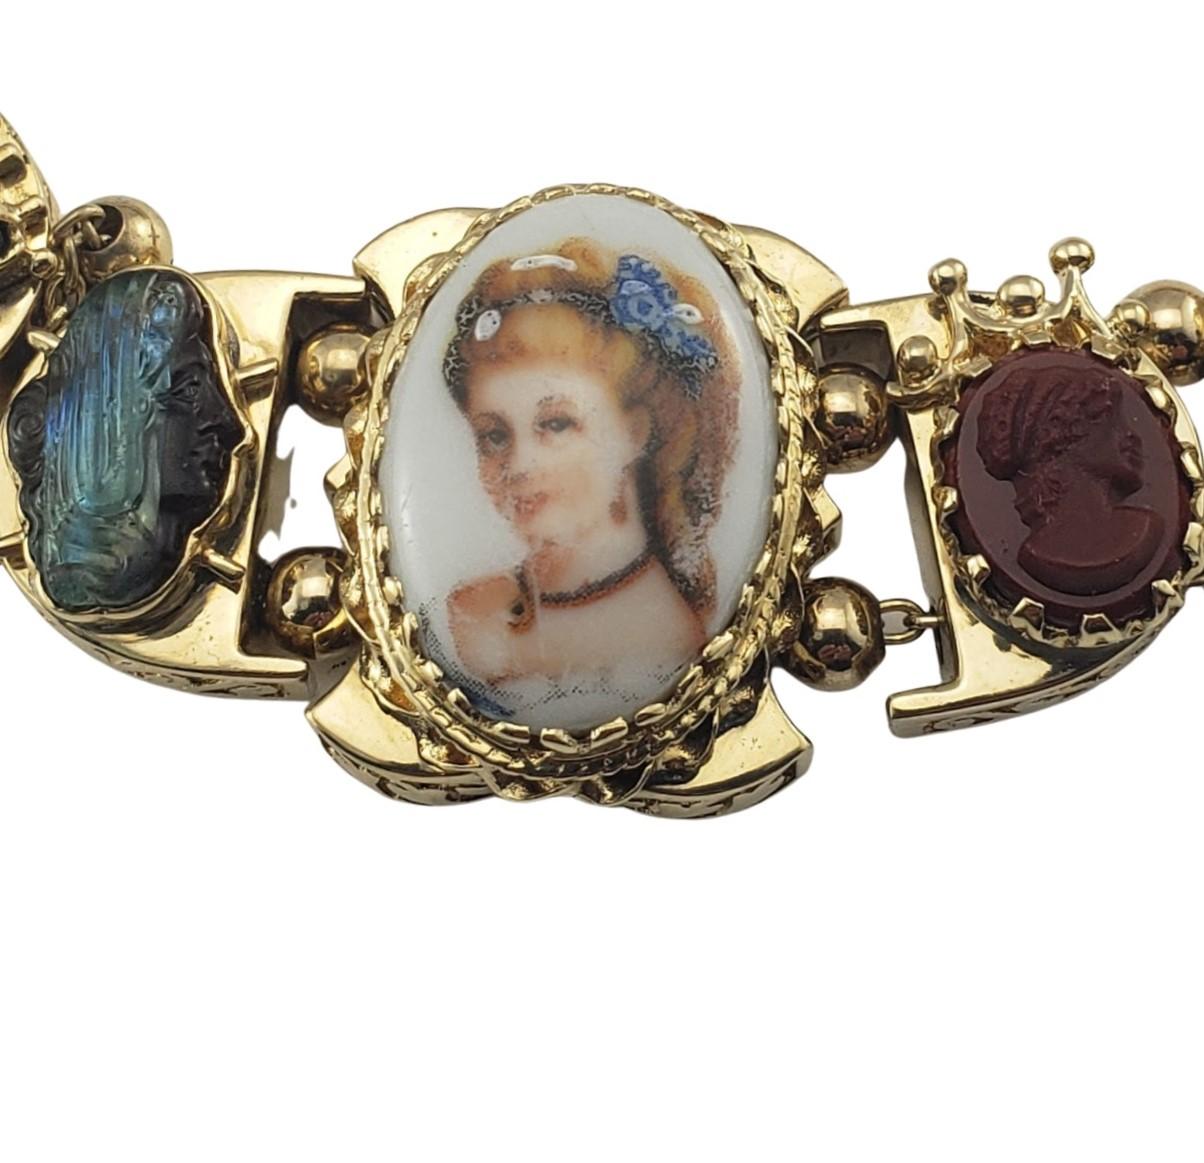 14 Karat Yellow Gold and Gemstone Cameo Bracelet-

This stunning bracelet features a painted cameo along with assorted gemstones set in beautifully detailed 14K yellow gold.  Safety chain closure.  Width:  22 mm.

Size:  6.5 inches

Weight:  28.5